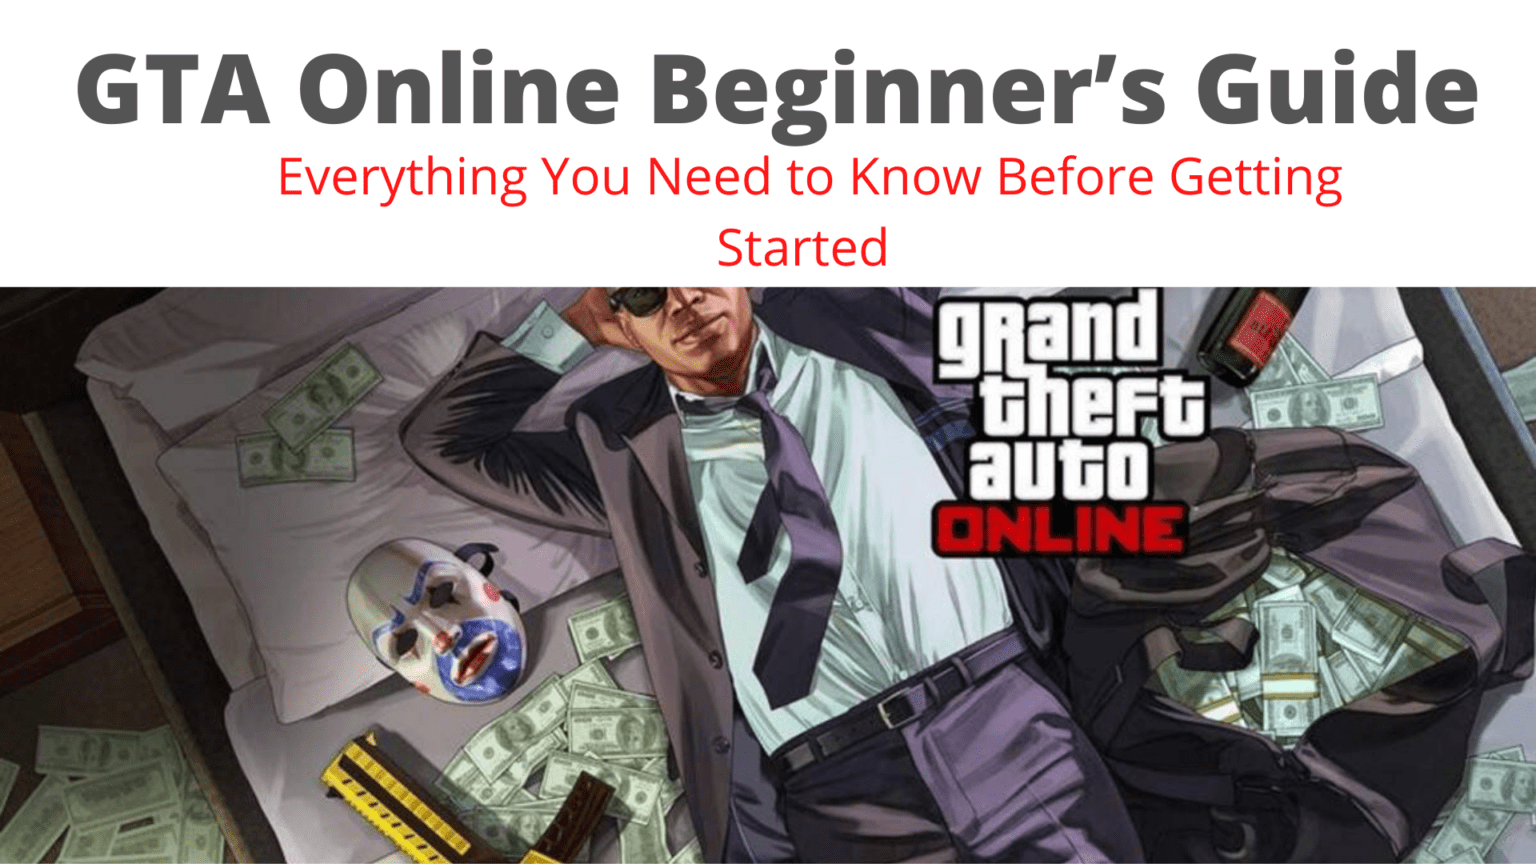 GTA Online Beginner’s Guide Everything You Need to Know Before Getting